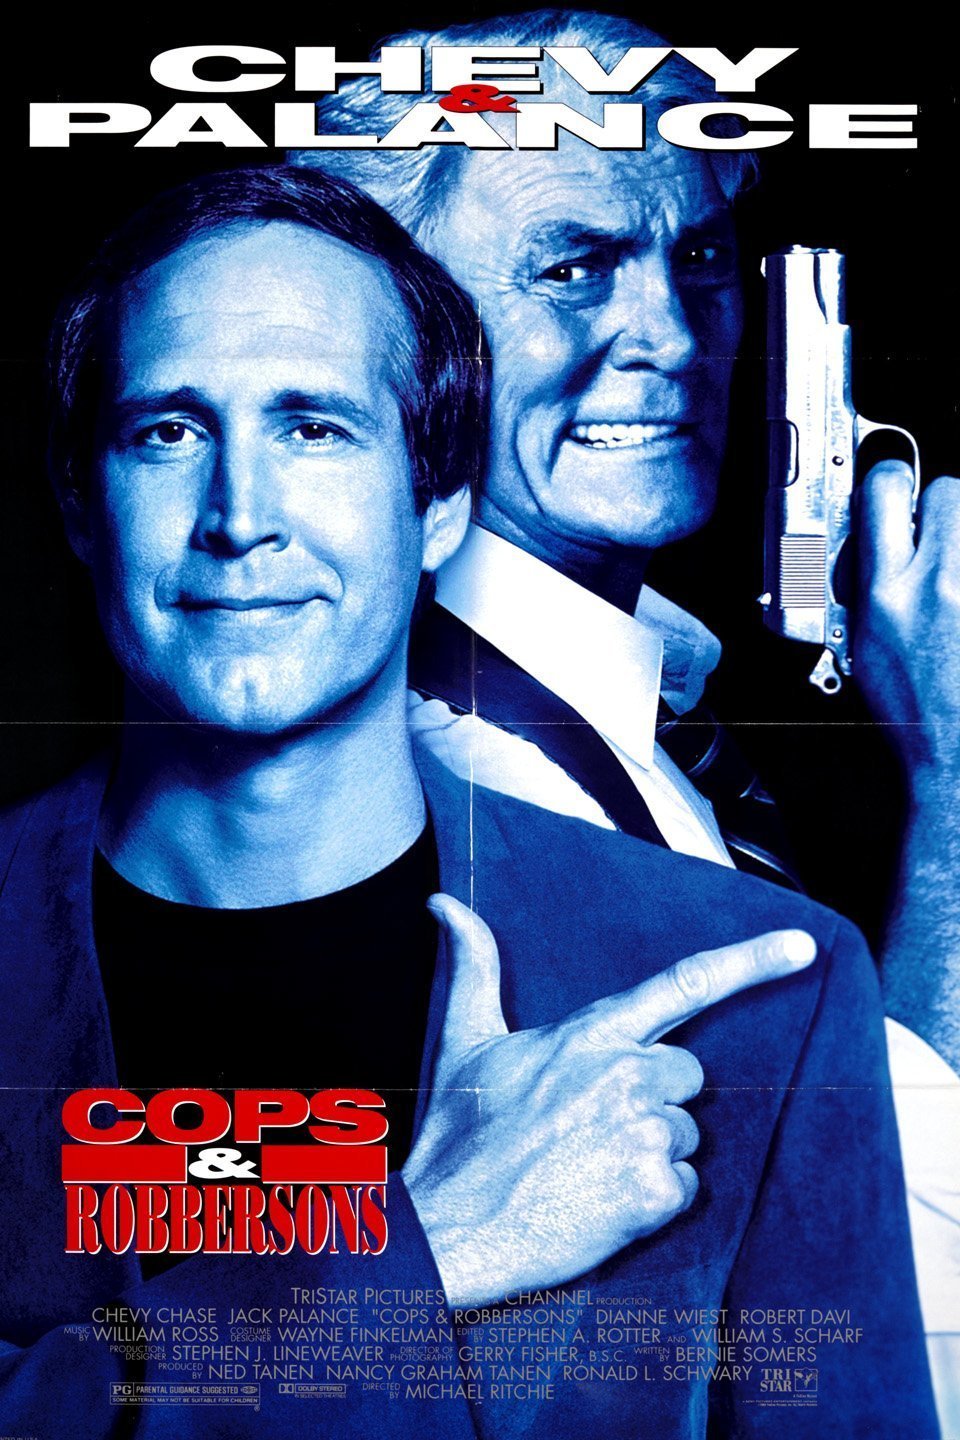 Poster of the movie Cops and Robbersons